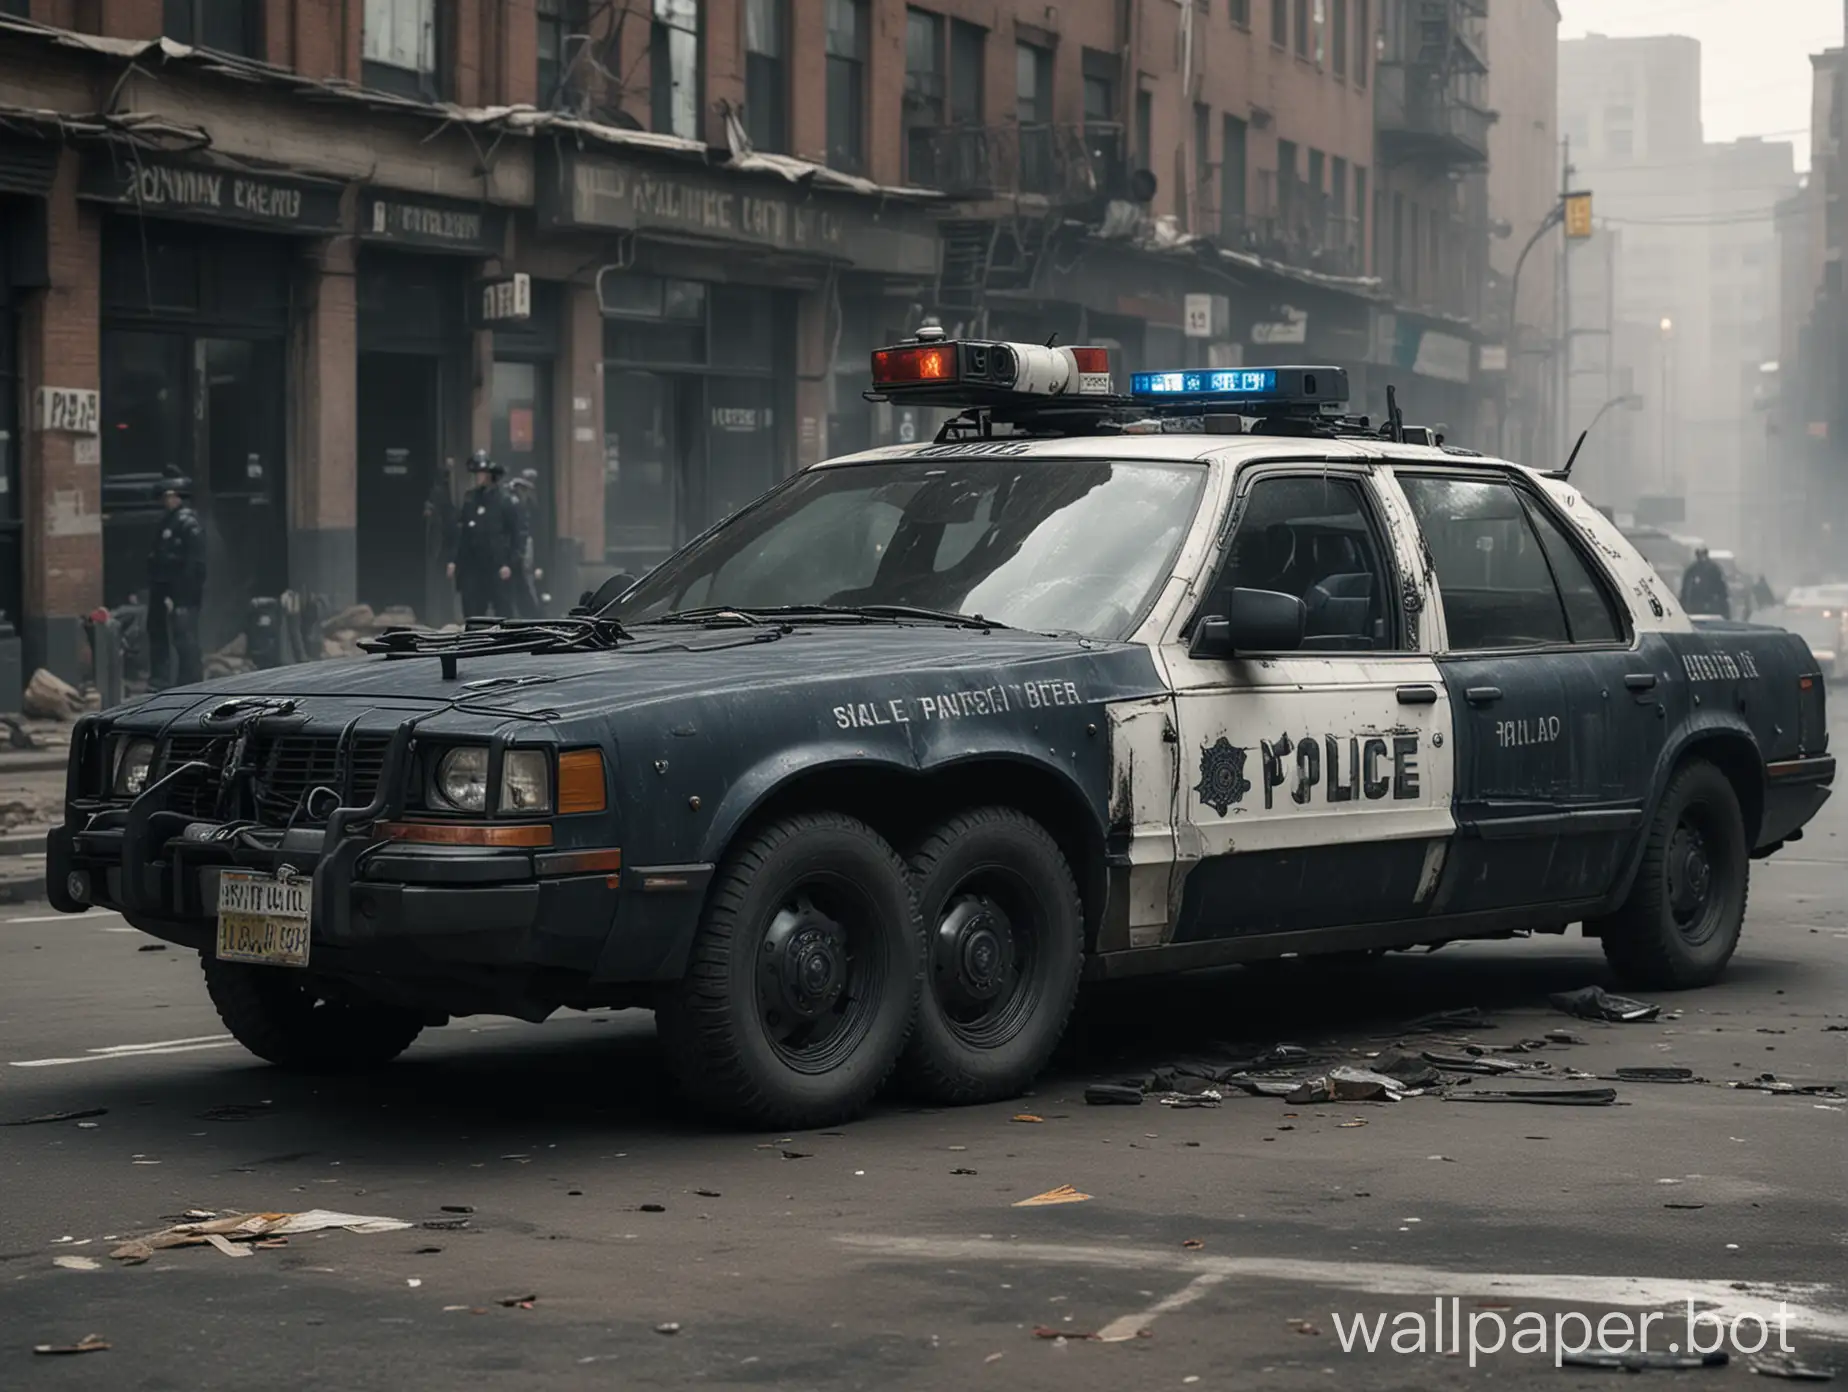 Dystopian-World-Police-Car-Futuristic-Law-Enforcement-Vehicle-in-a-Bleak-Society